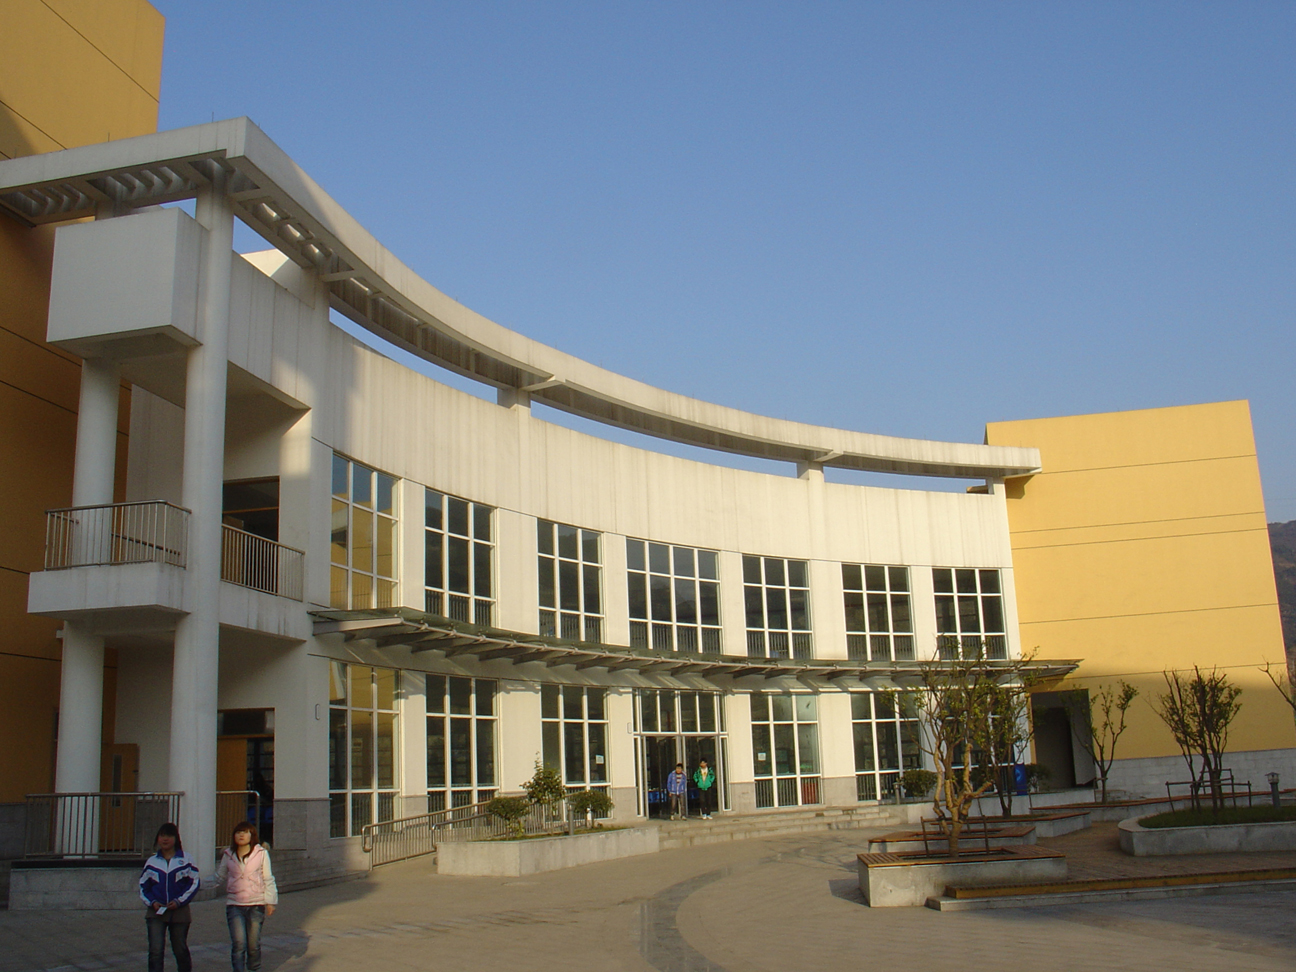 The cafeteria from the outside